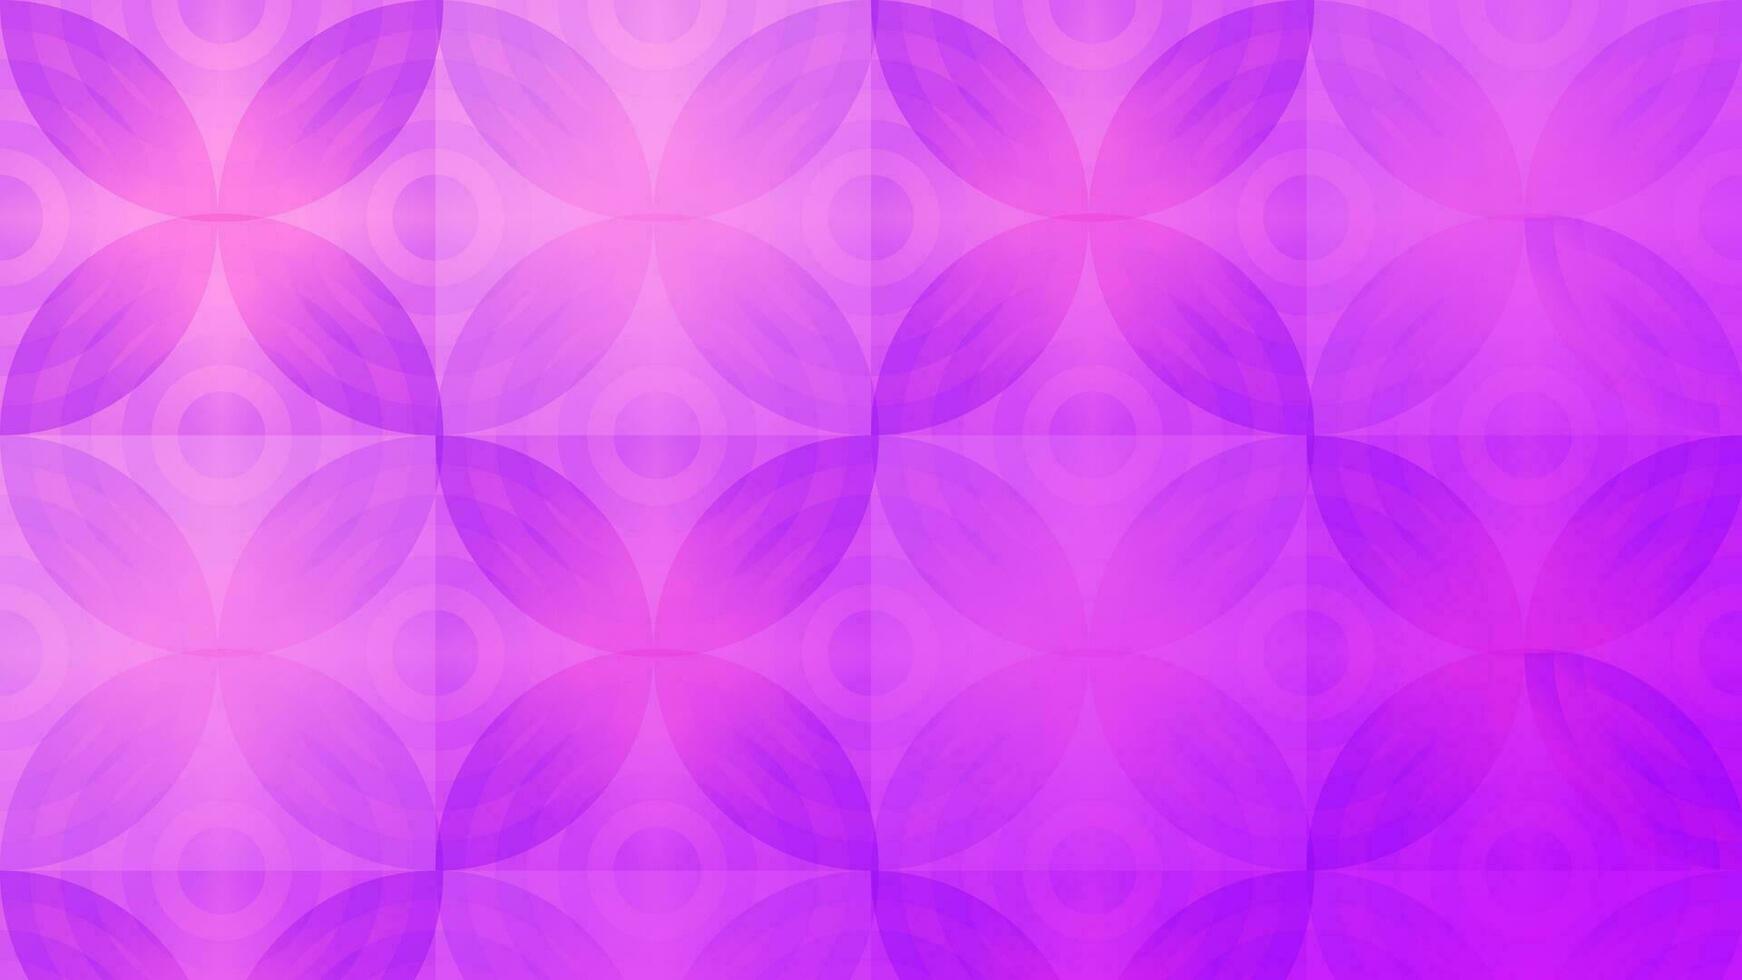 Vector Illustration of Gradient Purple Background with Illuminated Floral and Leaf Patterns glow